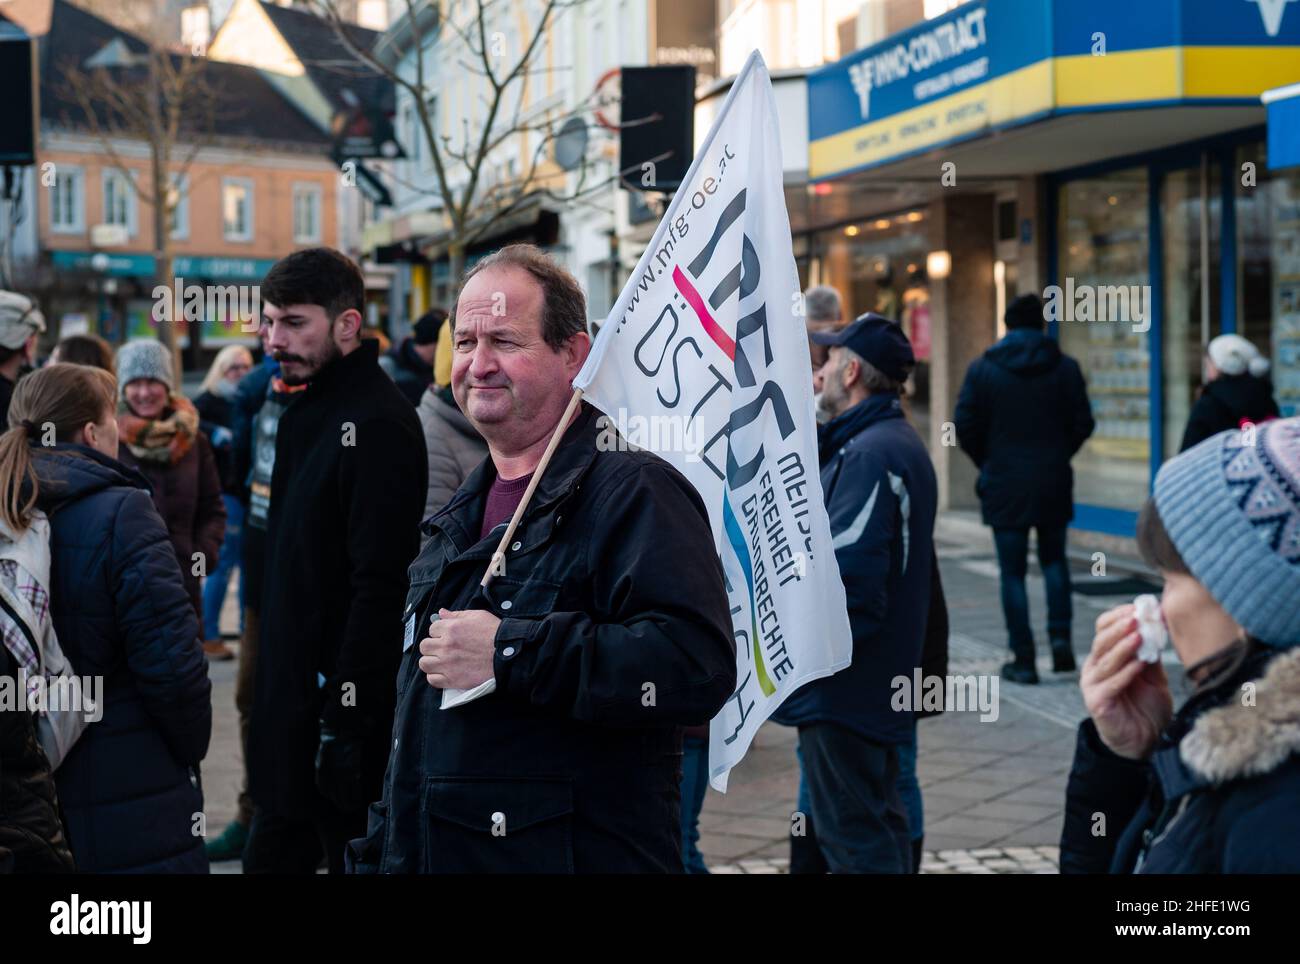 Amstetten, Austria - January 15 2022: Supporter of MFG Menschen Freiheit Grundrechte Party holding Flag at Protest or Demosntration against Mandatory Stock Photo